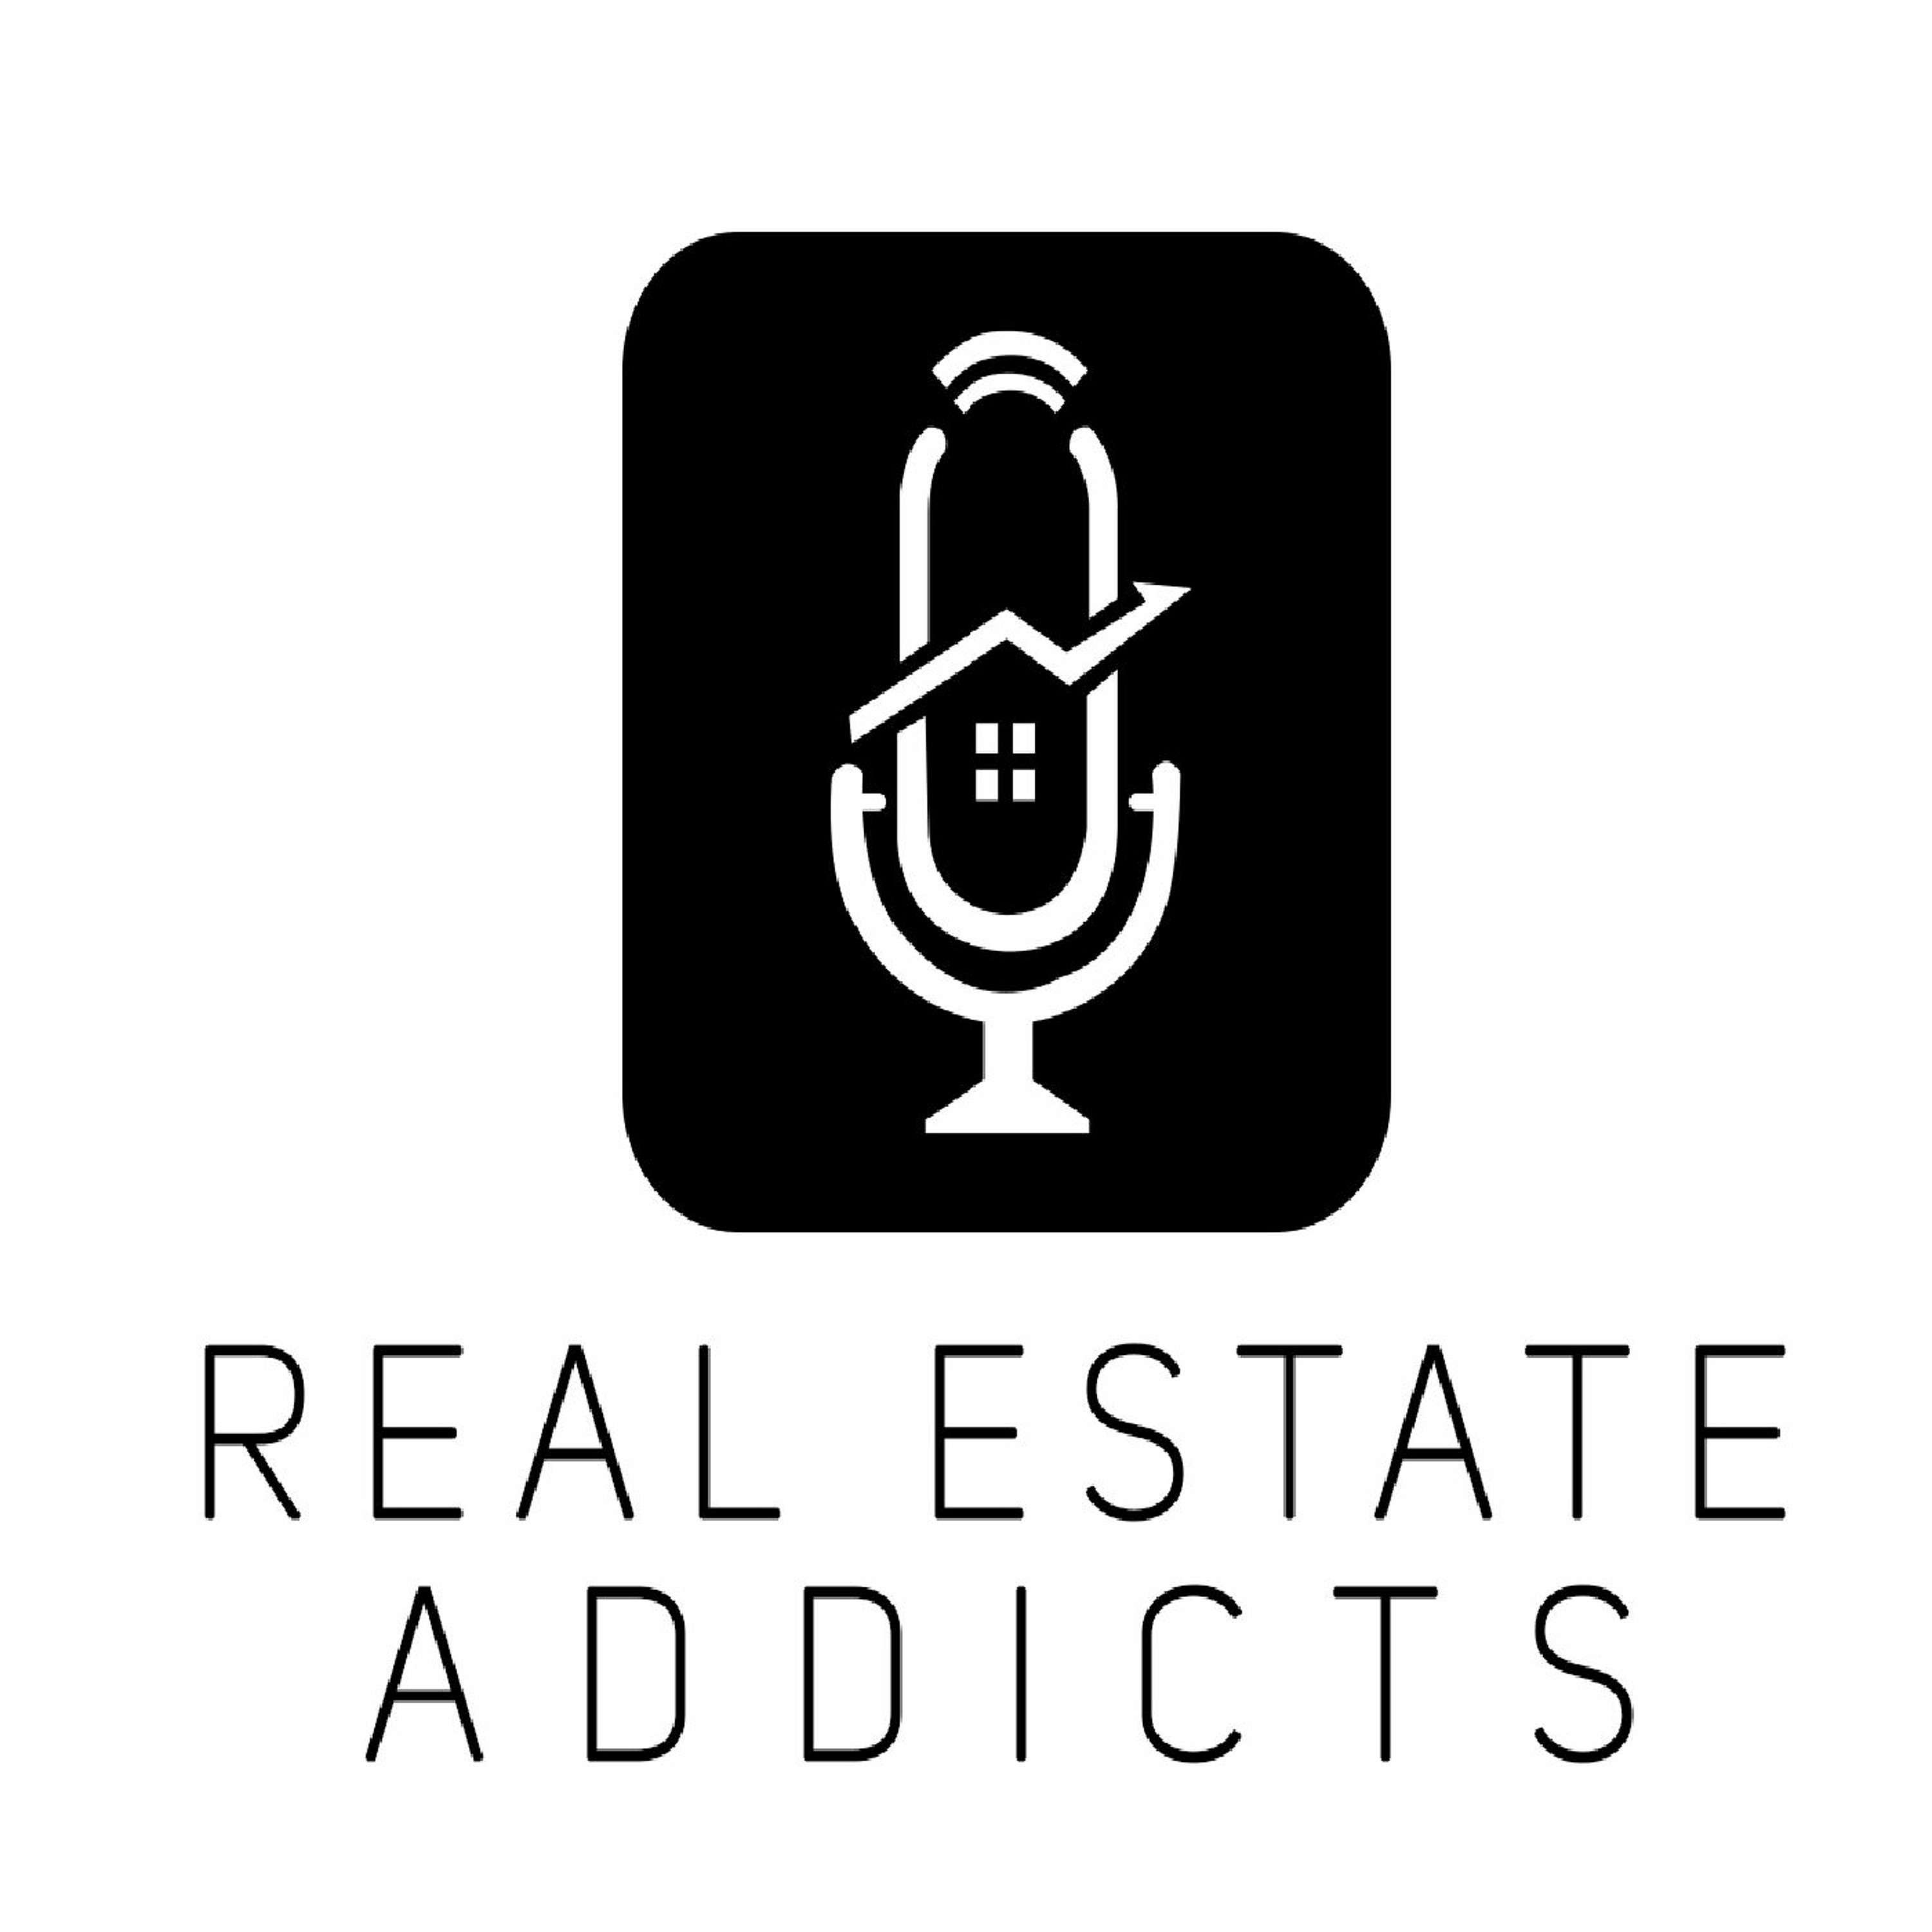 #1 Real Estate Addicts The Story - Hosts Marc, Dan & Ray talk about their careers as RE Developers